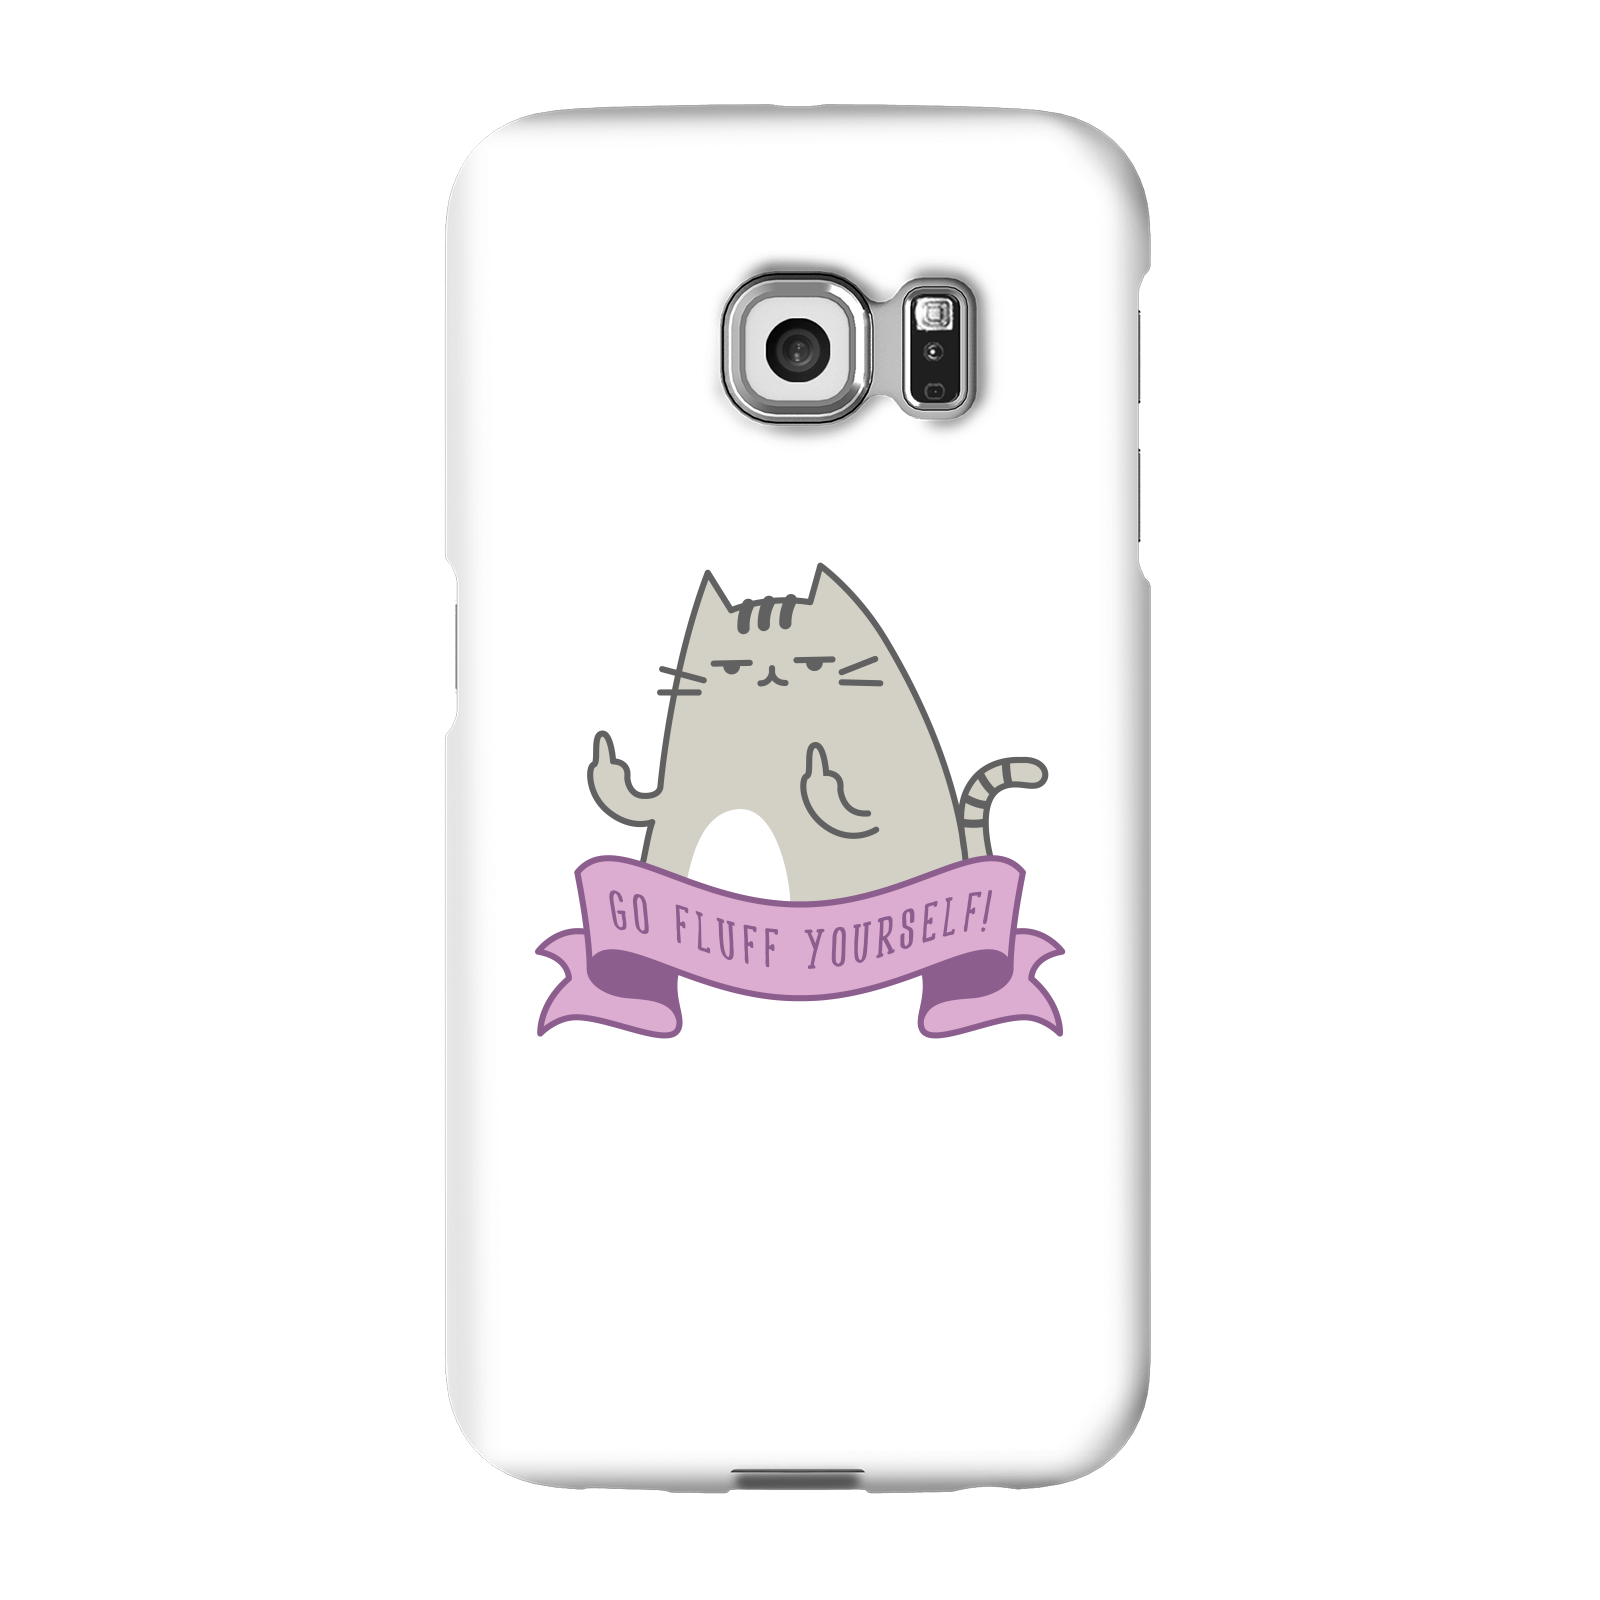 Go Fluff Yourself! Phone Case for iPhone and Android - Samsung S6 Edge Plus - Snap Case - Matte